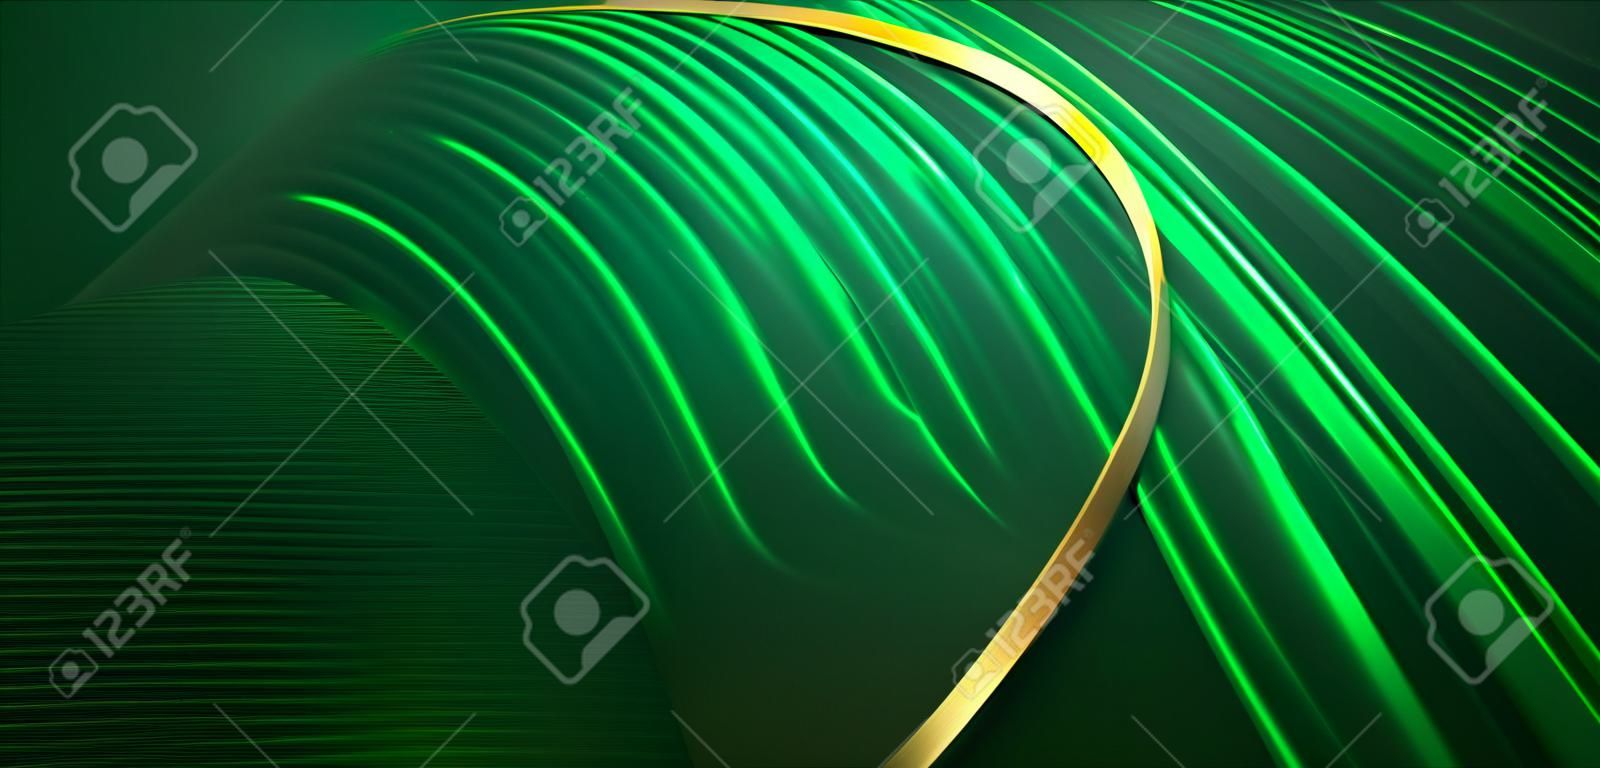 Abstract 3d gold curved green ribbon on dark green background with lighting effect and sparkle with copy space for text. Luxury design style. Vector illustration